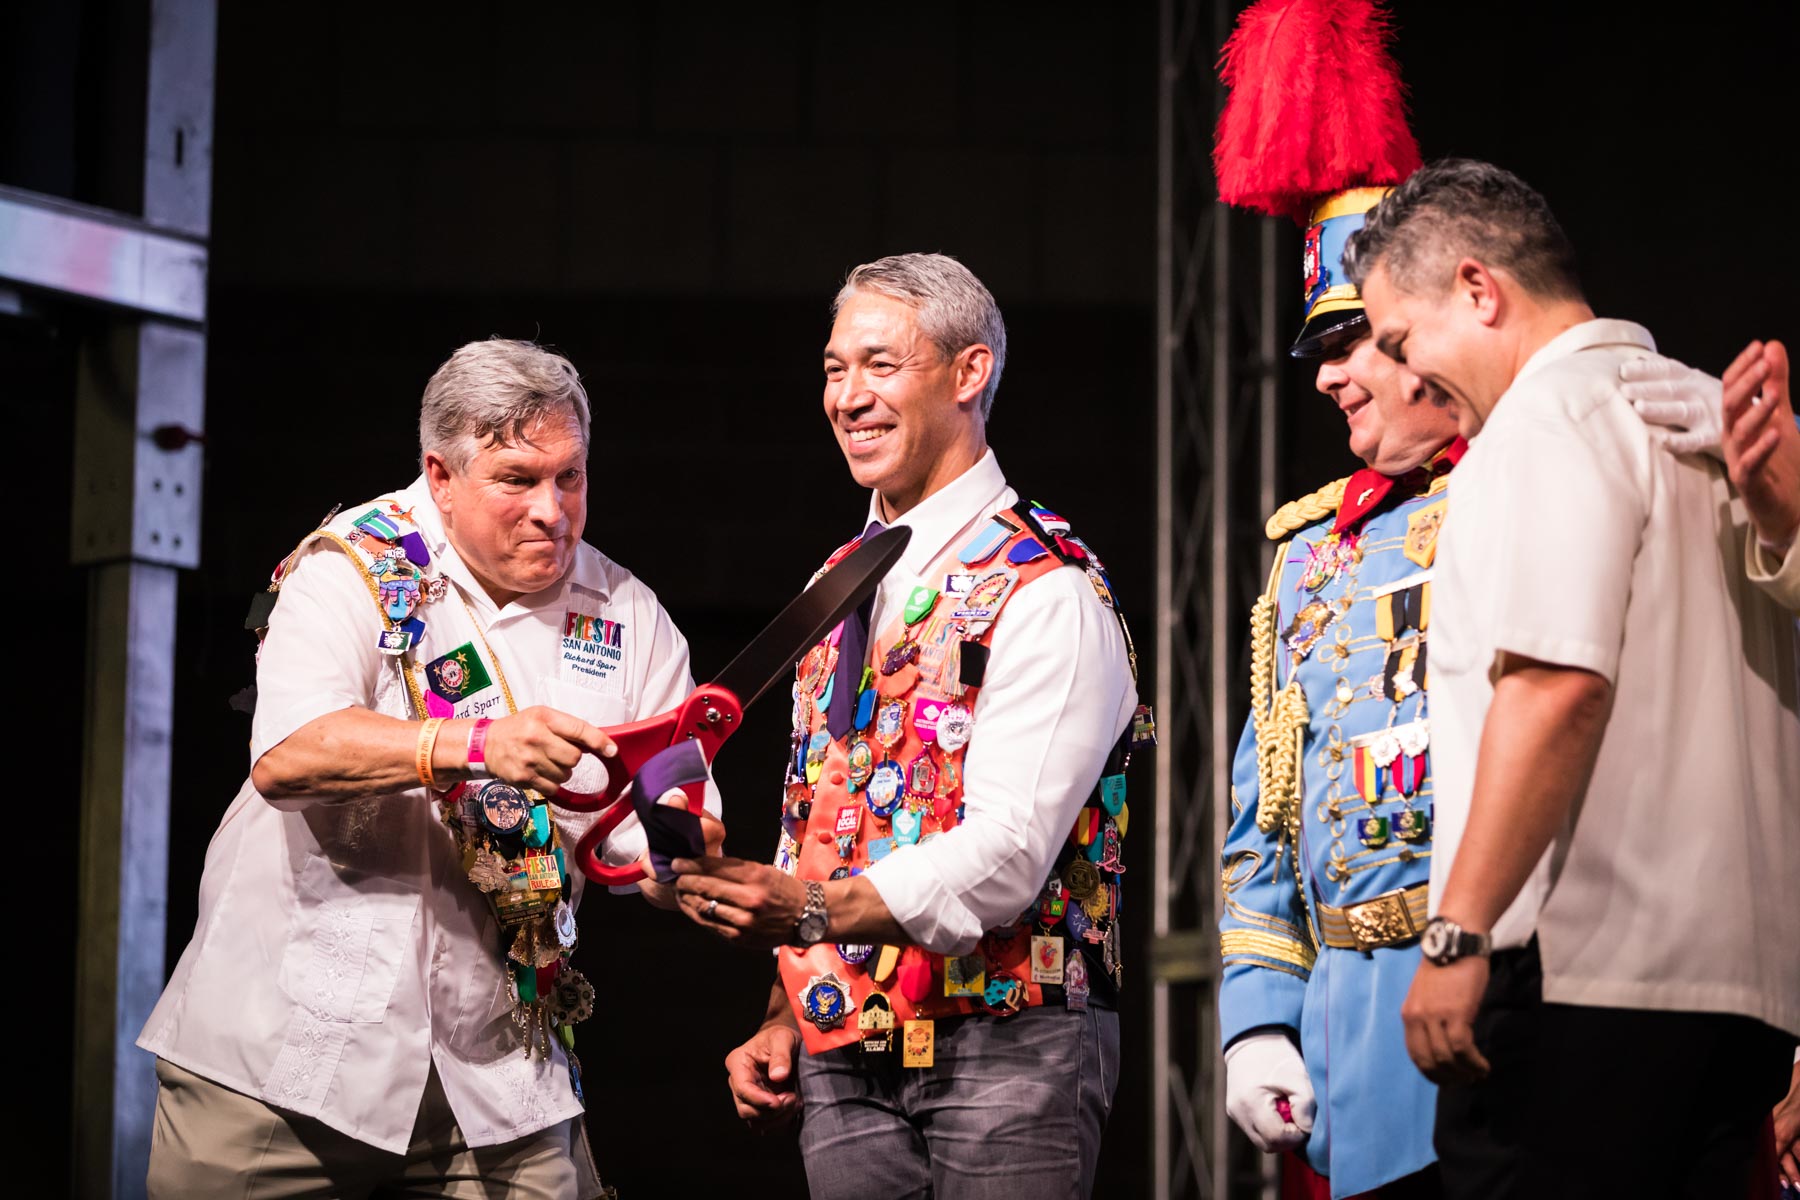 Mayor Ron Nirenberg at the cutting of ties during Fiesta Fiesta for an article on the best Fiesta photos